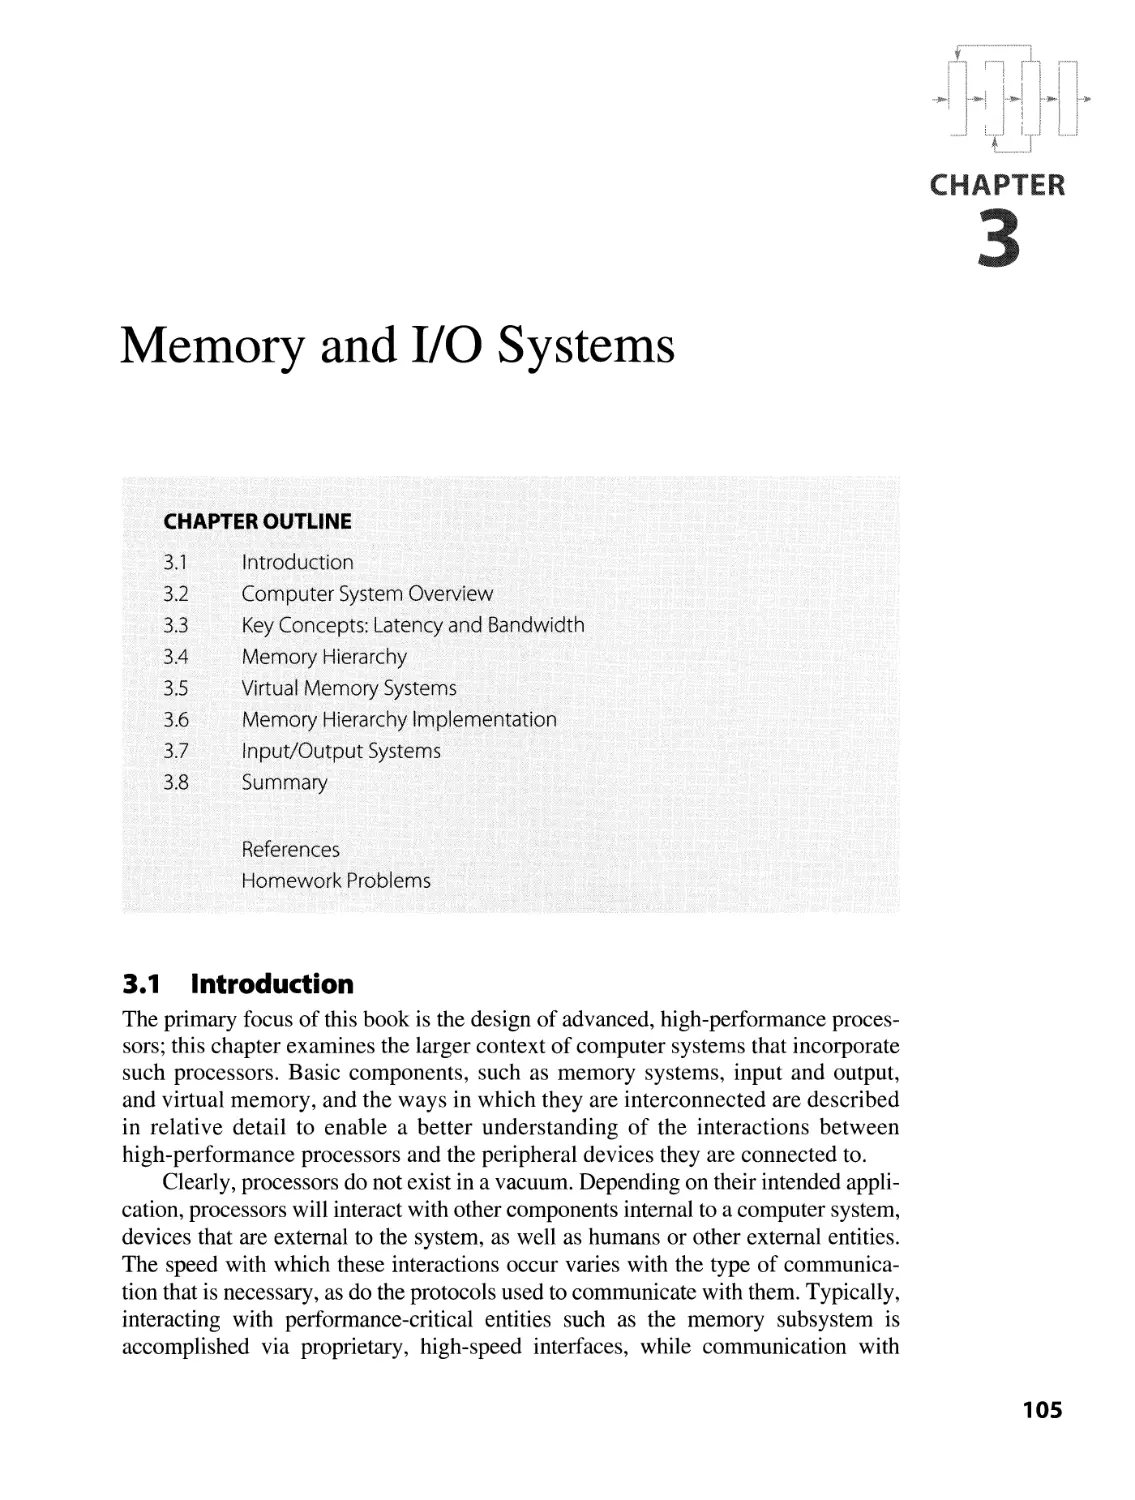 3. Memory and I/O Systems
3.1 Introduction